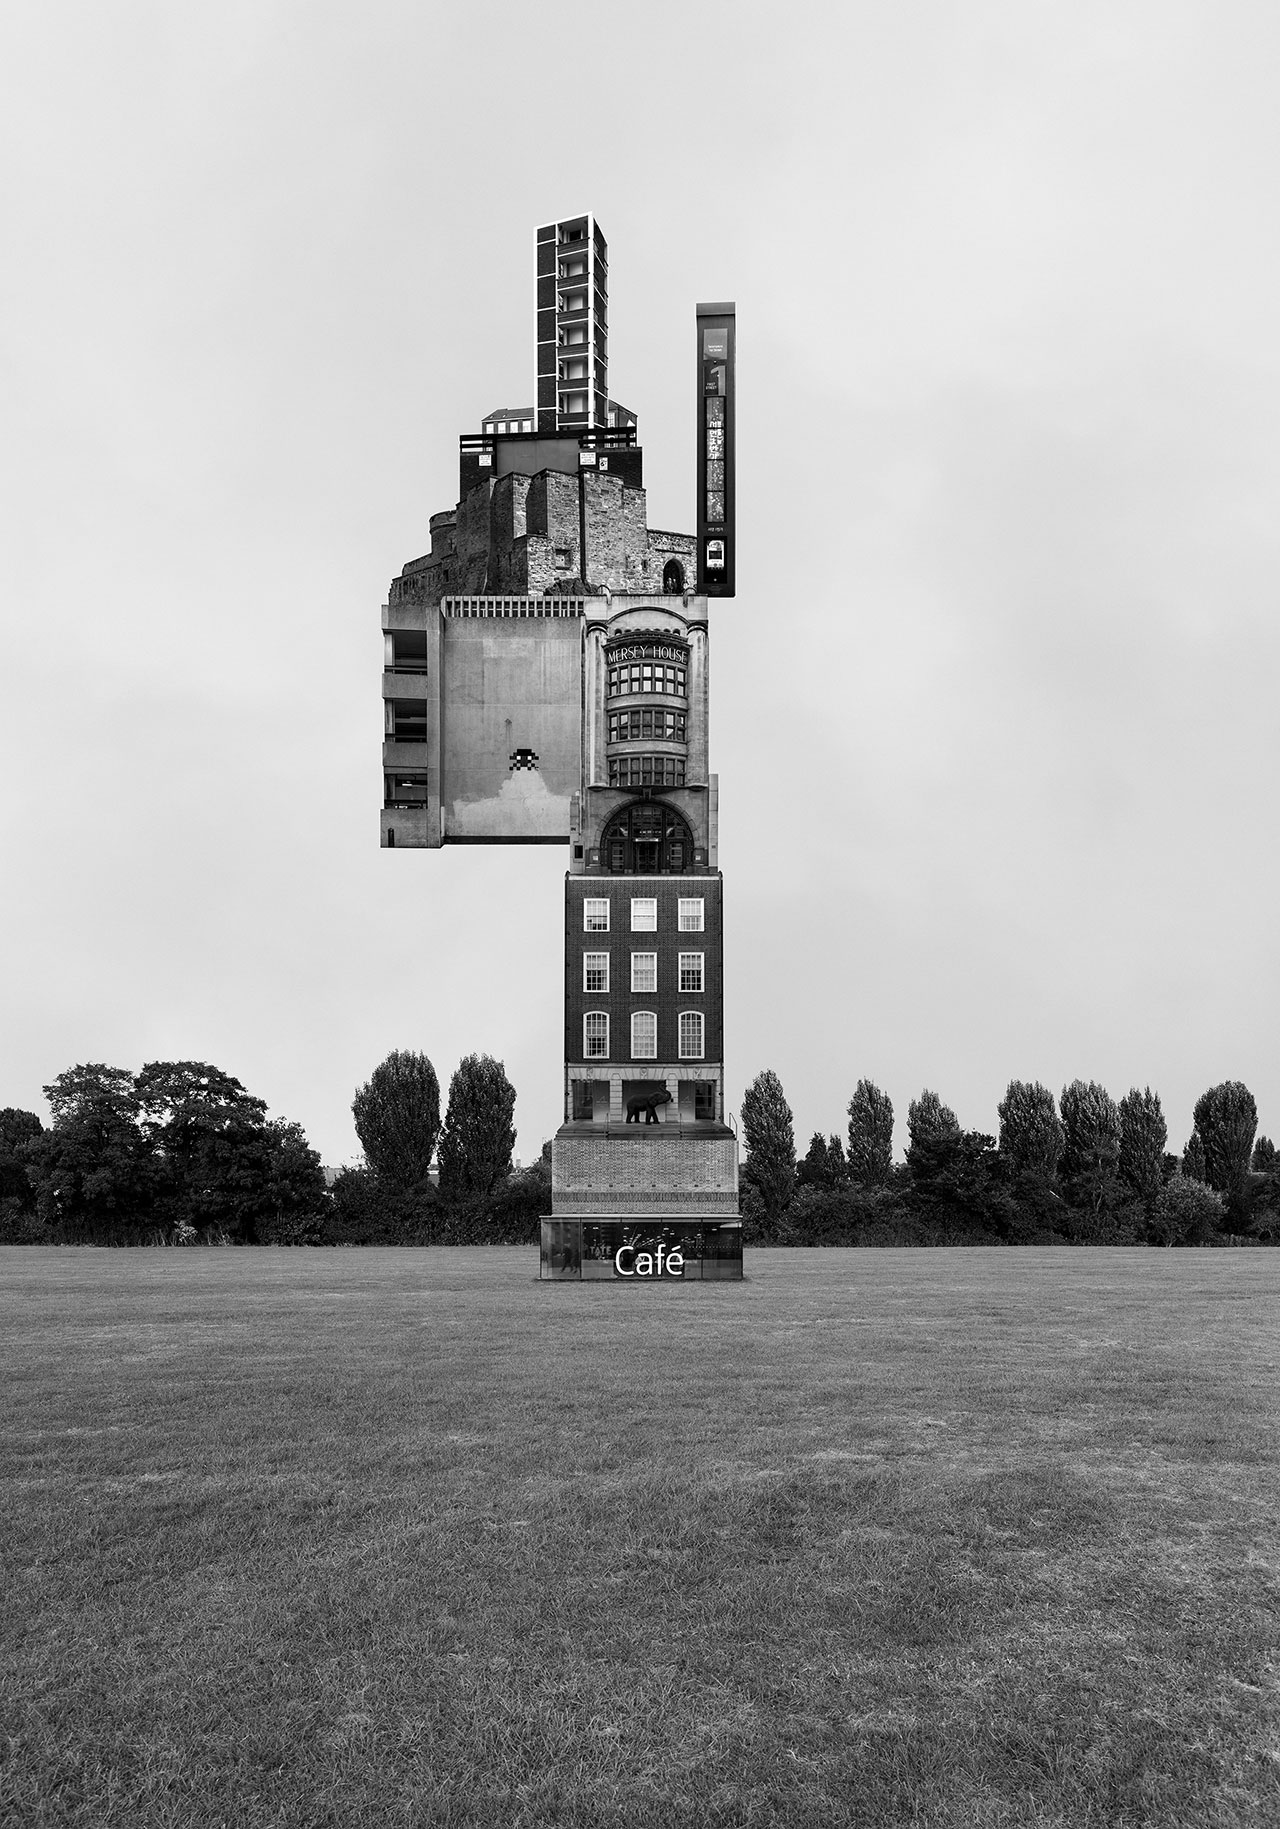 Beomsik Won, Archisculpture 026, 2014. Archival pigment print, 100x70 or 171x120cm. 